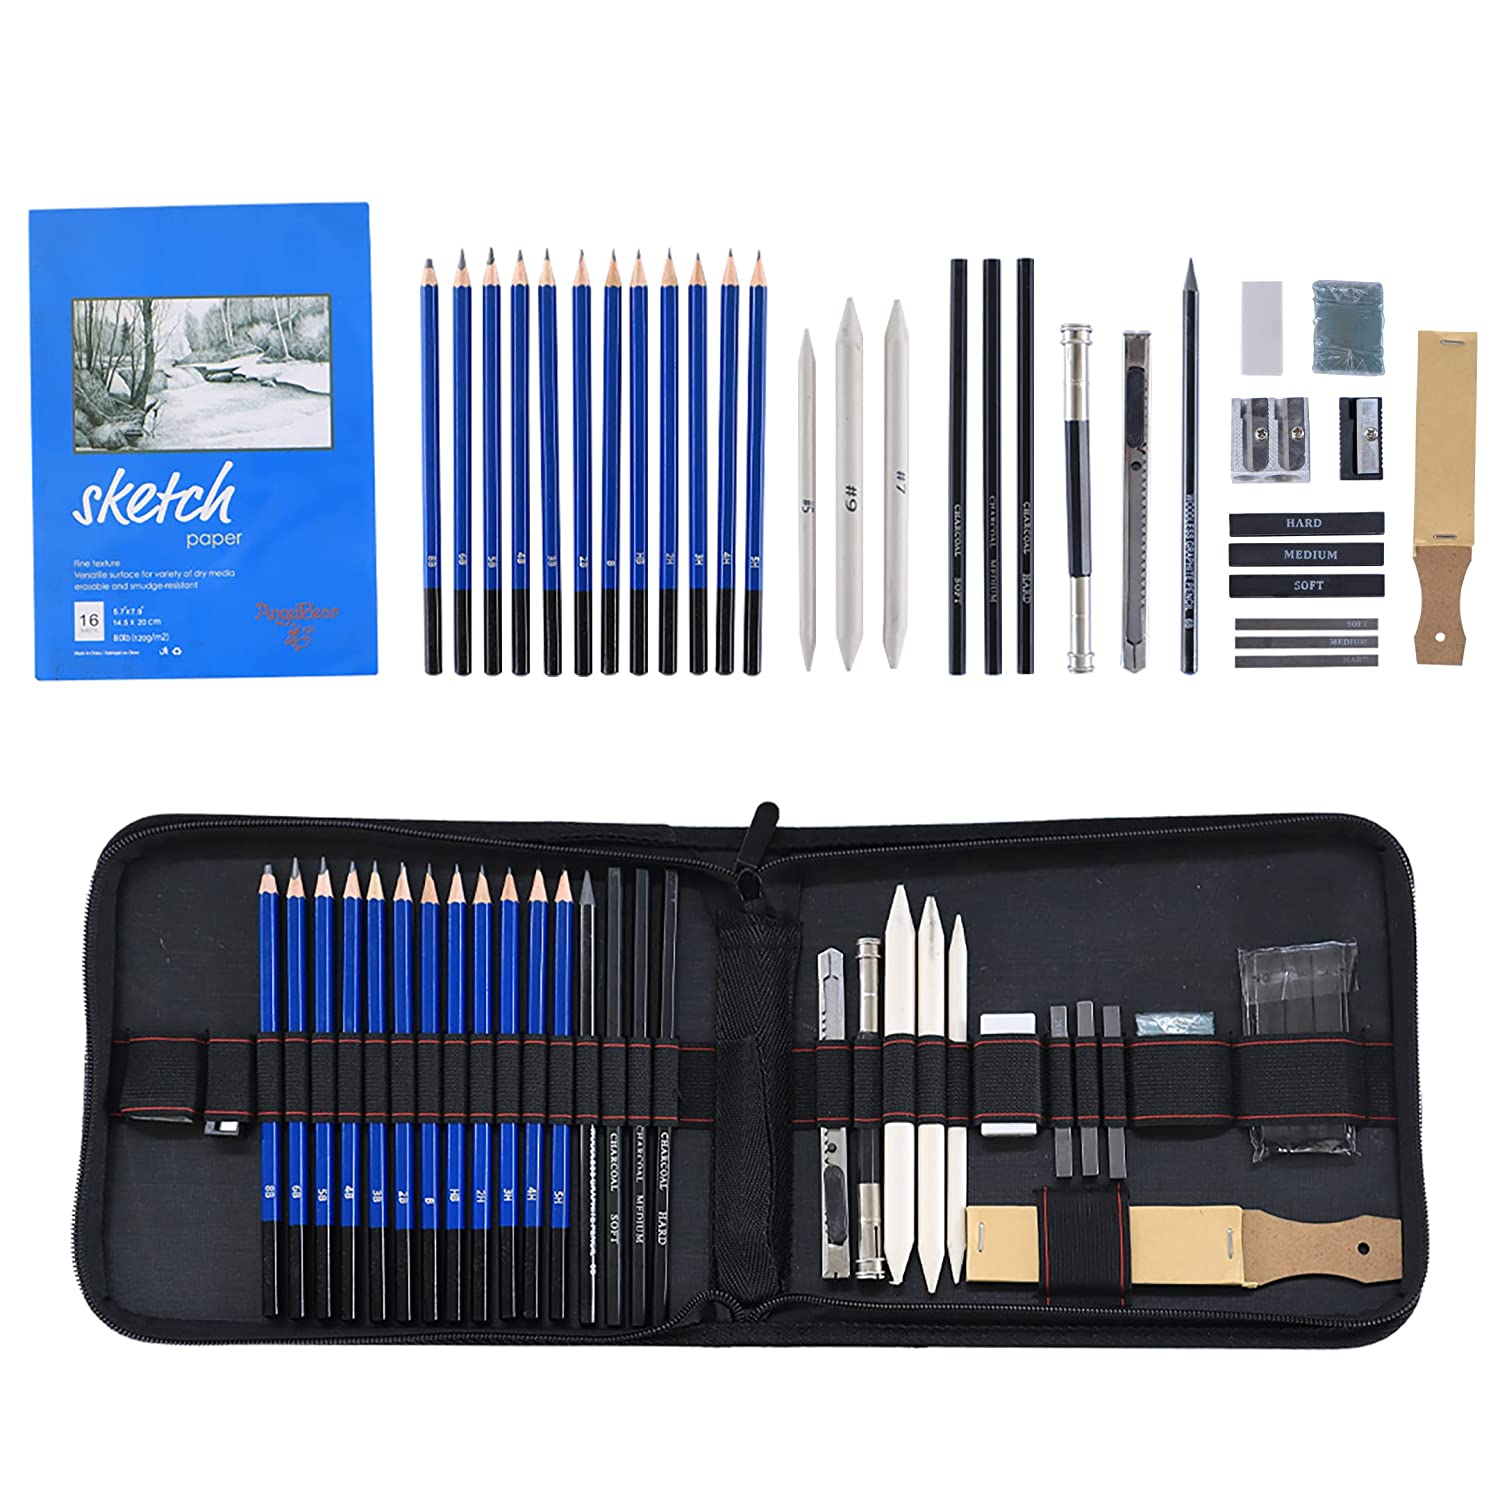 Special Offer Drawing Set 1 A3 Sketch Pad, 1 Pack of Charcoal Pencils & 1  Pack of HB Pencils 